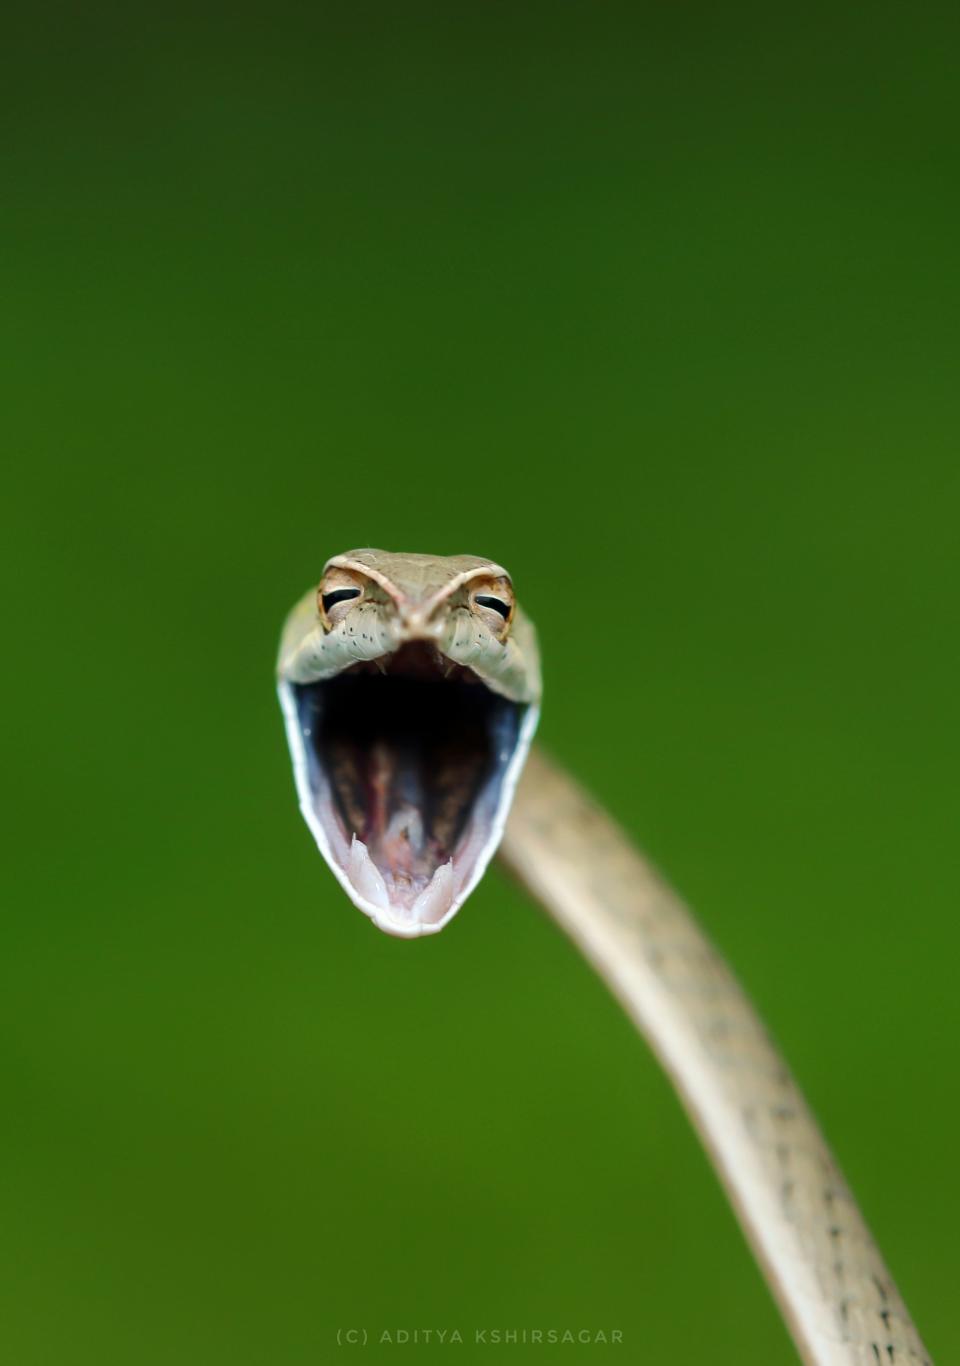 A snake with its mouth wide open, like it's laughing.